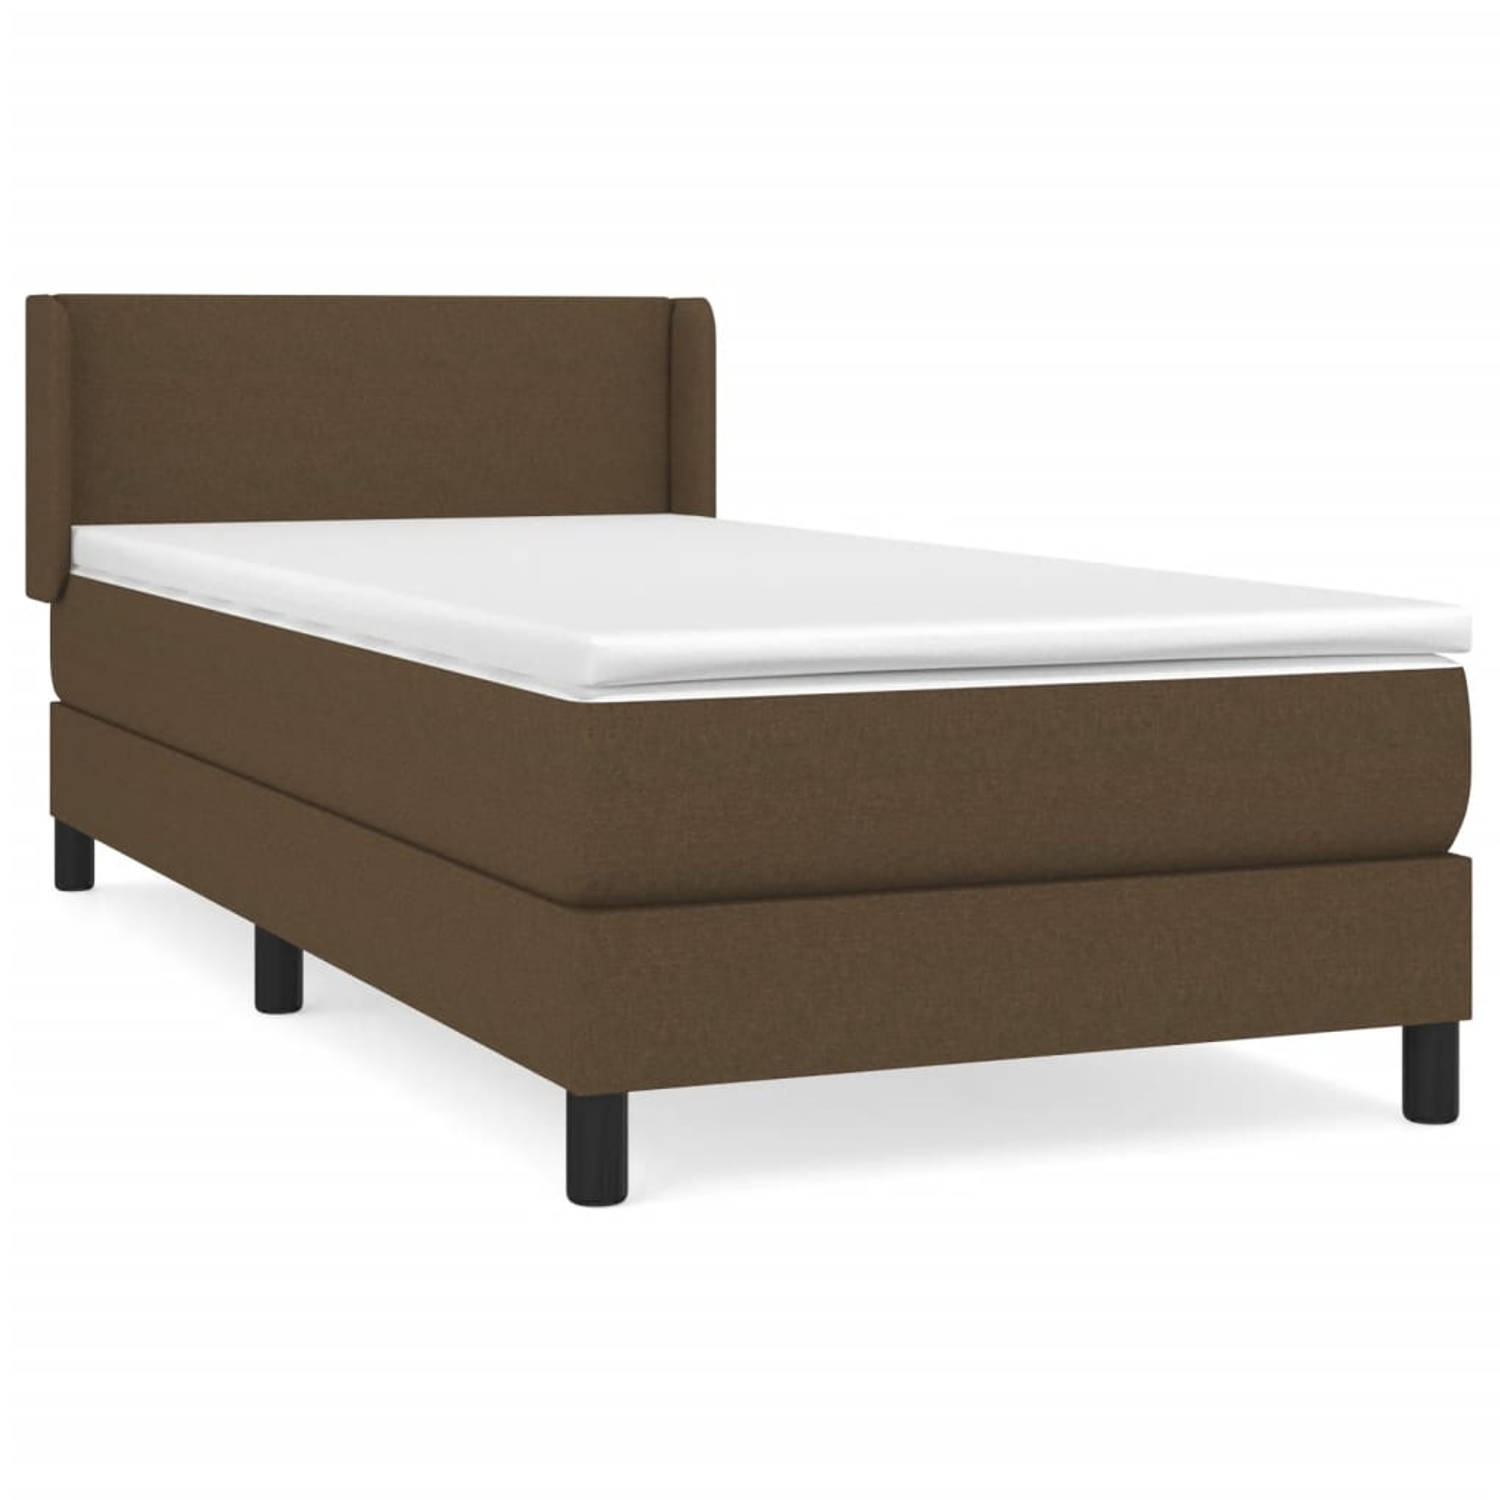 The Living Store Boxspringbed - - Bed - 203 x 83 x 78/88 cm - Donkerbruin - Stof - Pocketvering matras